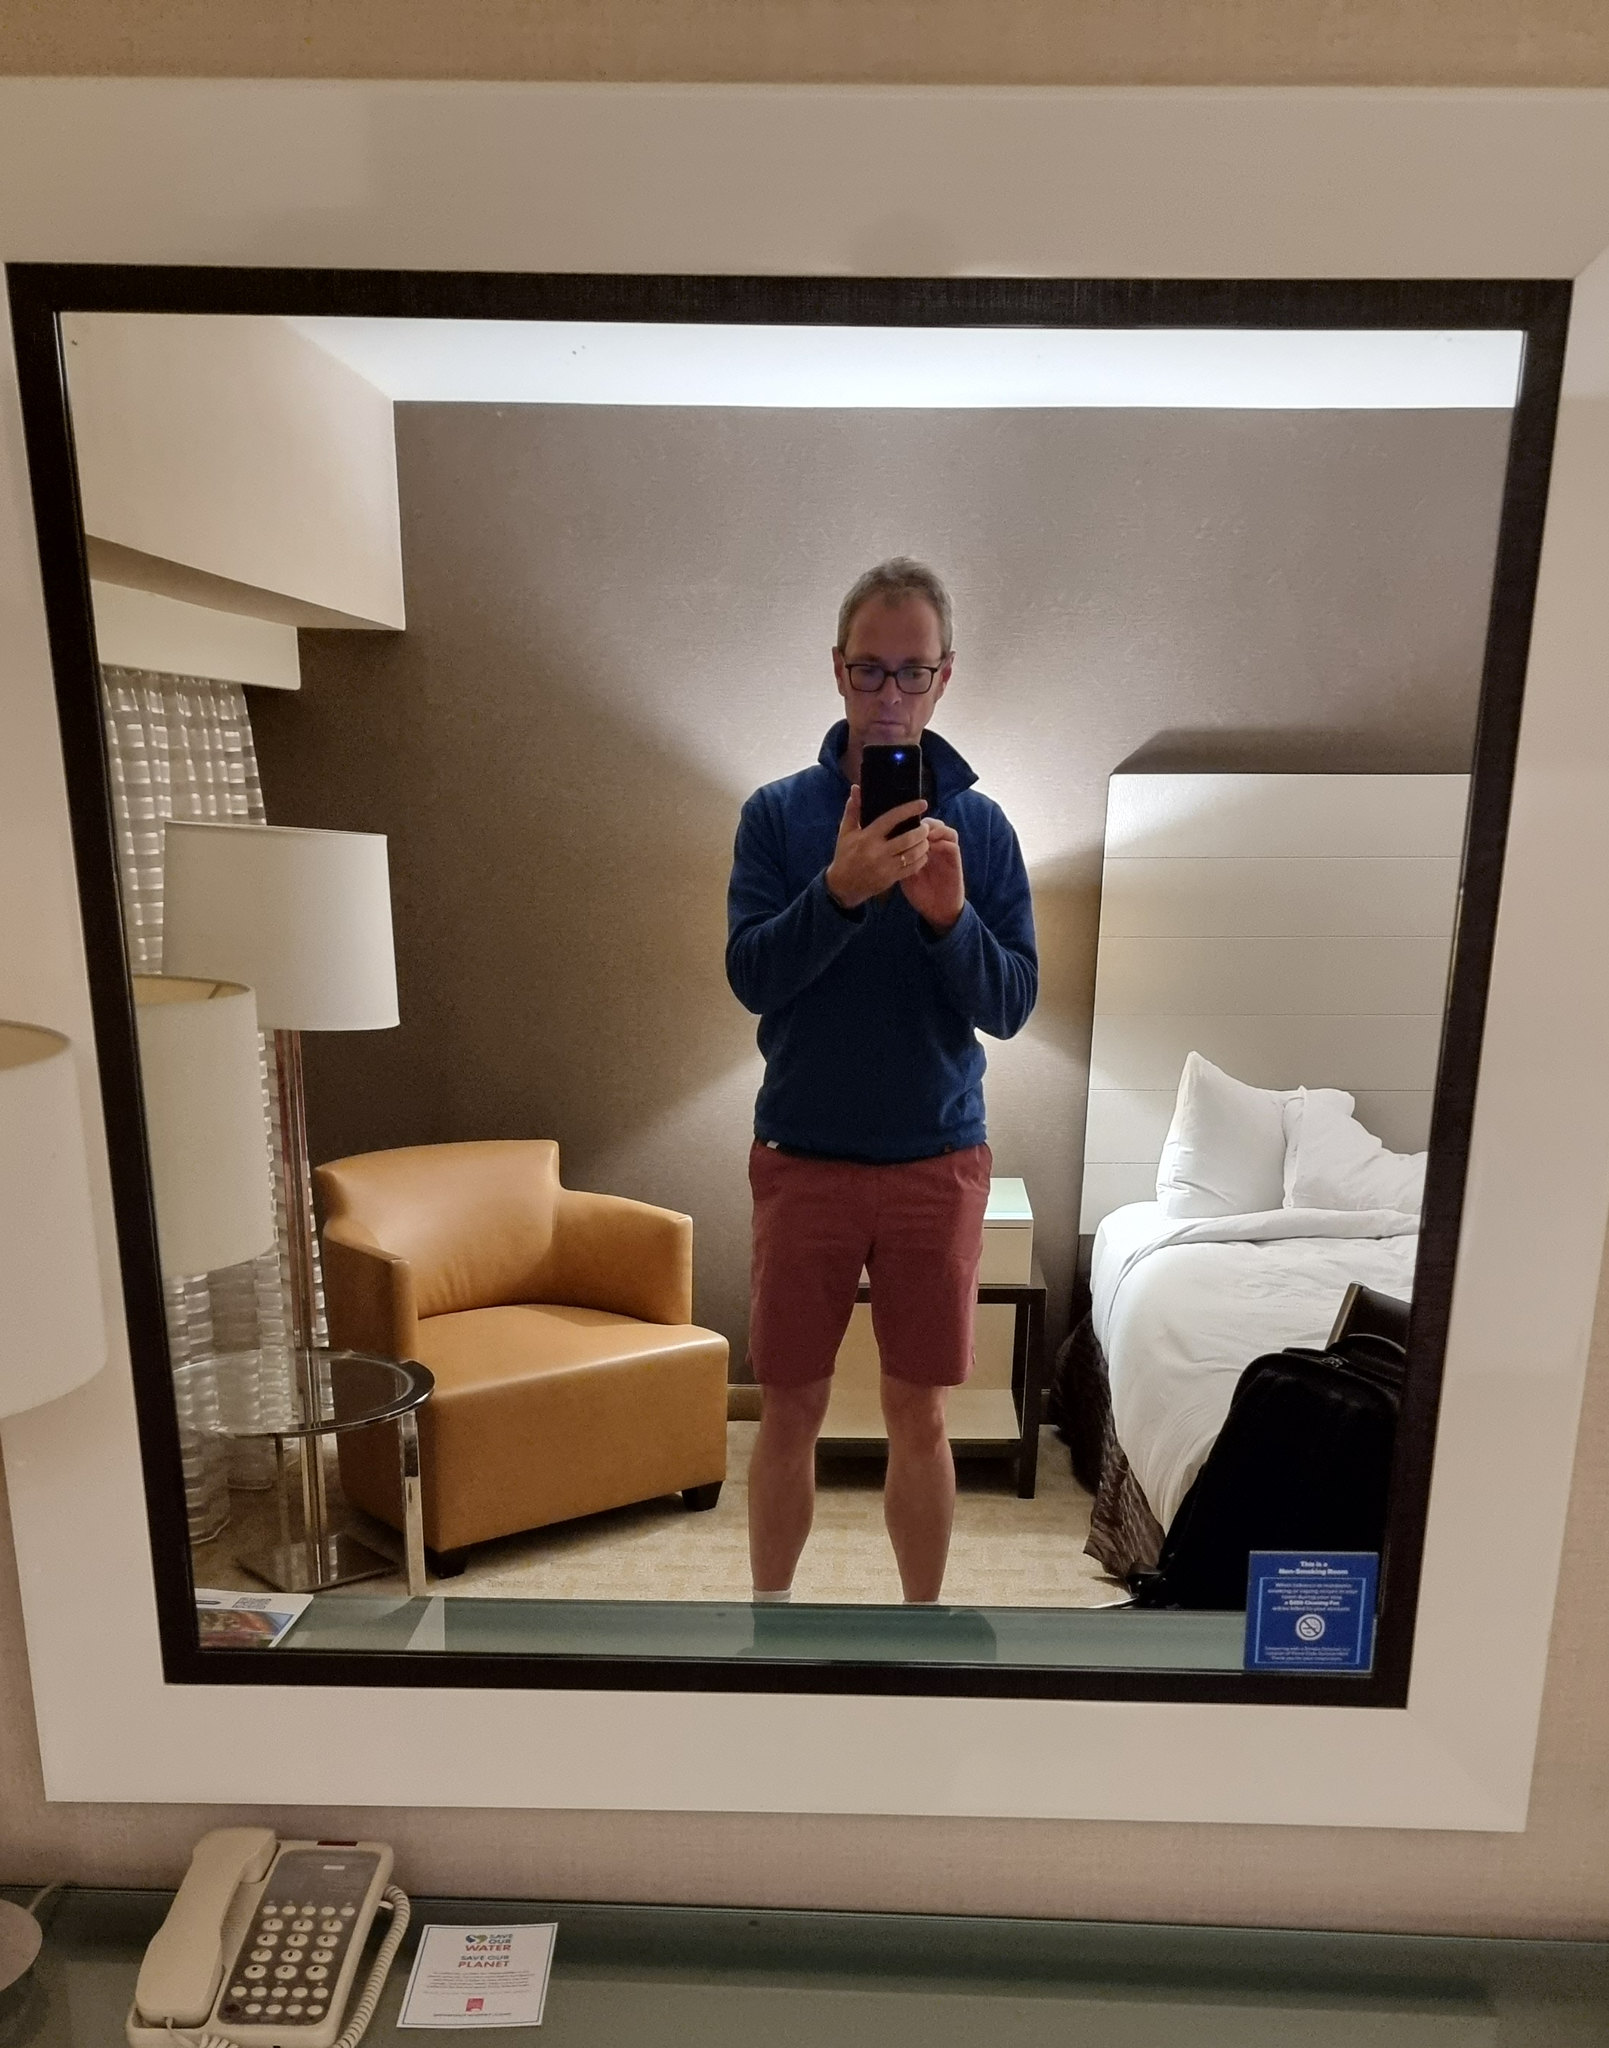 Back into shorts - you cant go to Hawaii in jeans!